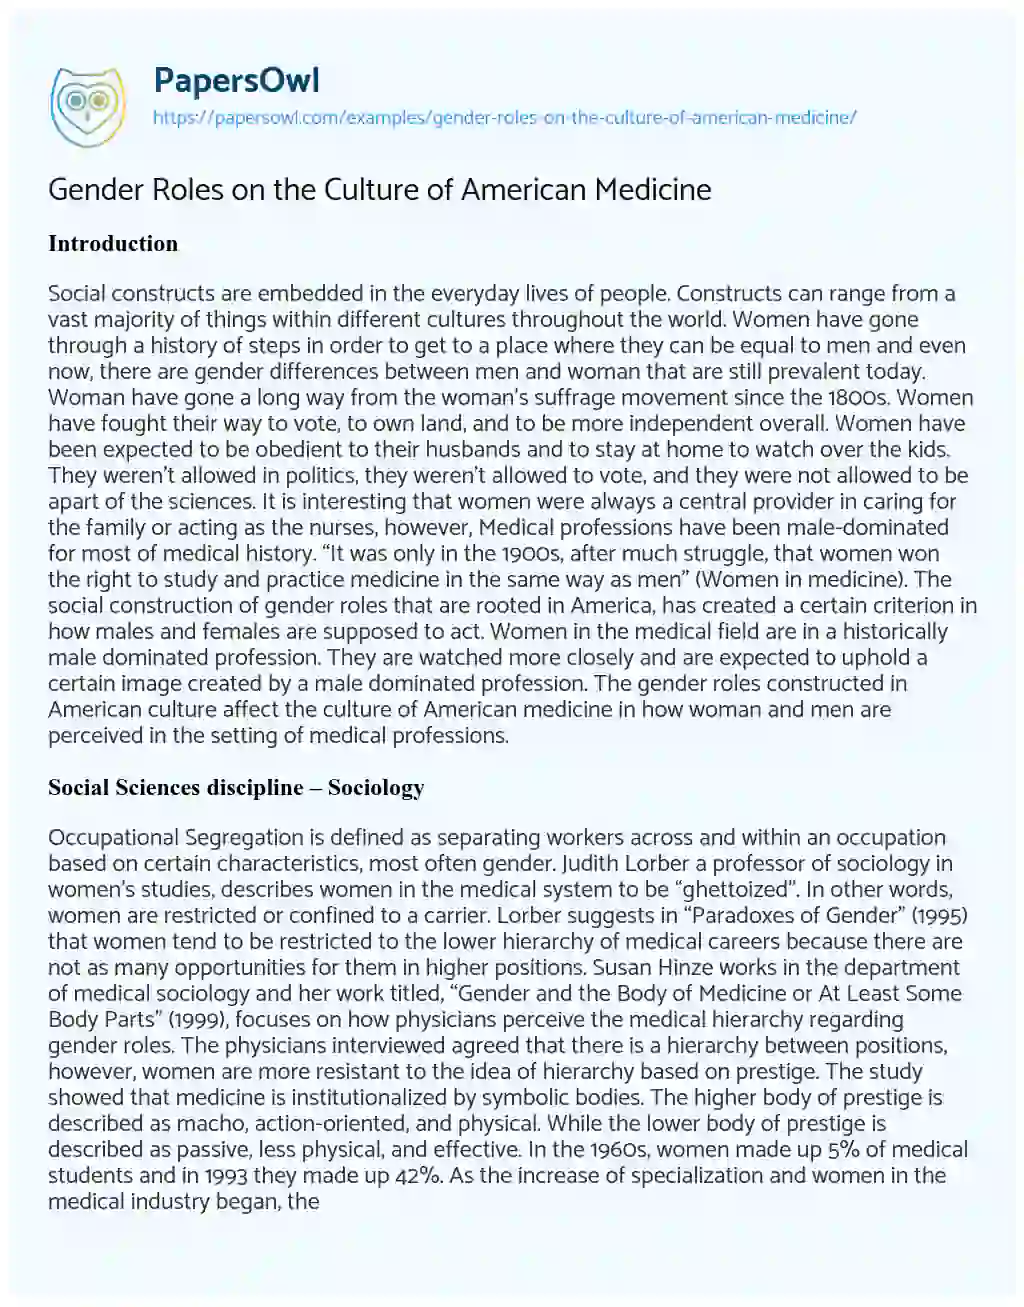 Essay on Gender Roles on the Culture of American Medicine